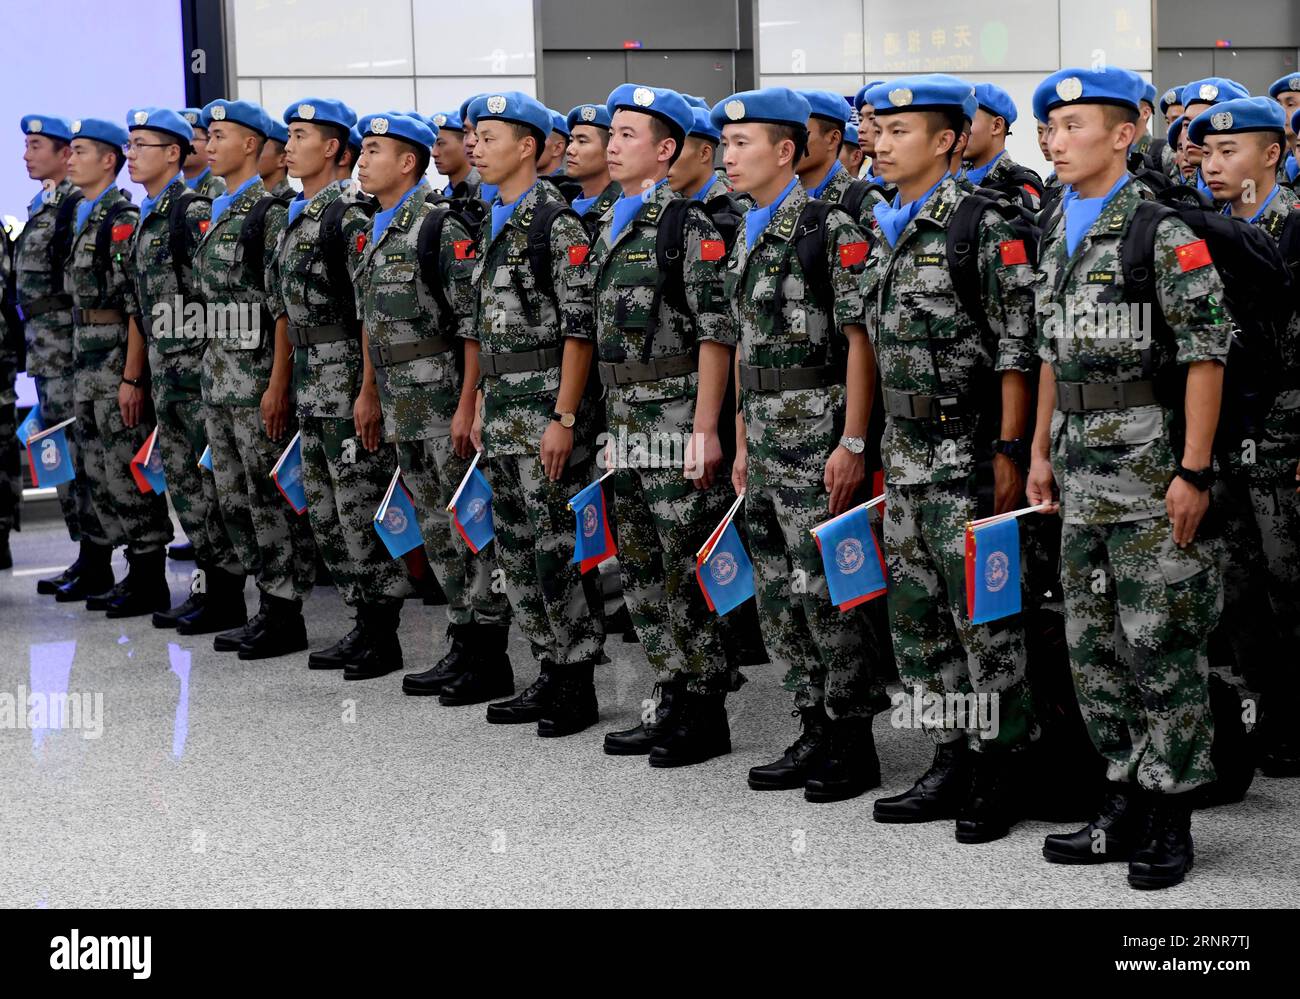 (170922) -- ZHENGZHOU, Sept. 22, 2017 -- Chinese peacekeepers attend a ceremony before leaving for South Sudan from Zhengzhou, capital of central China s Henan Province, Sept. 21, 2017. The 105-member squad of Chinese peacekeepers left for Wau in South Sudan on a one-year peacekeeping mission. ) (ry) CHINA-ZHENGZHOU-SOUTH SUDAN-PEACEKEEPERS (CN) ZhuxXiang PUBLICATIONxNOTxINxCHN Stock Photo